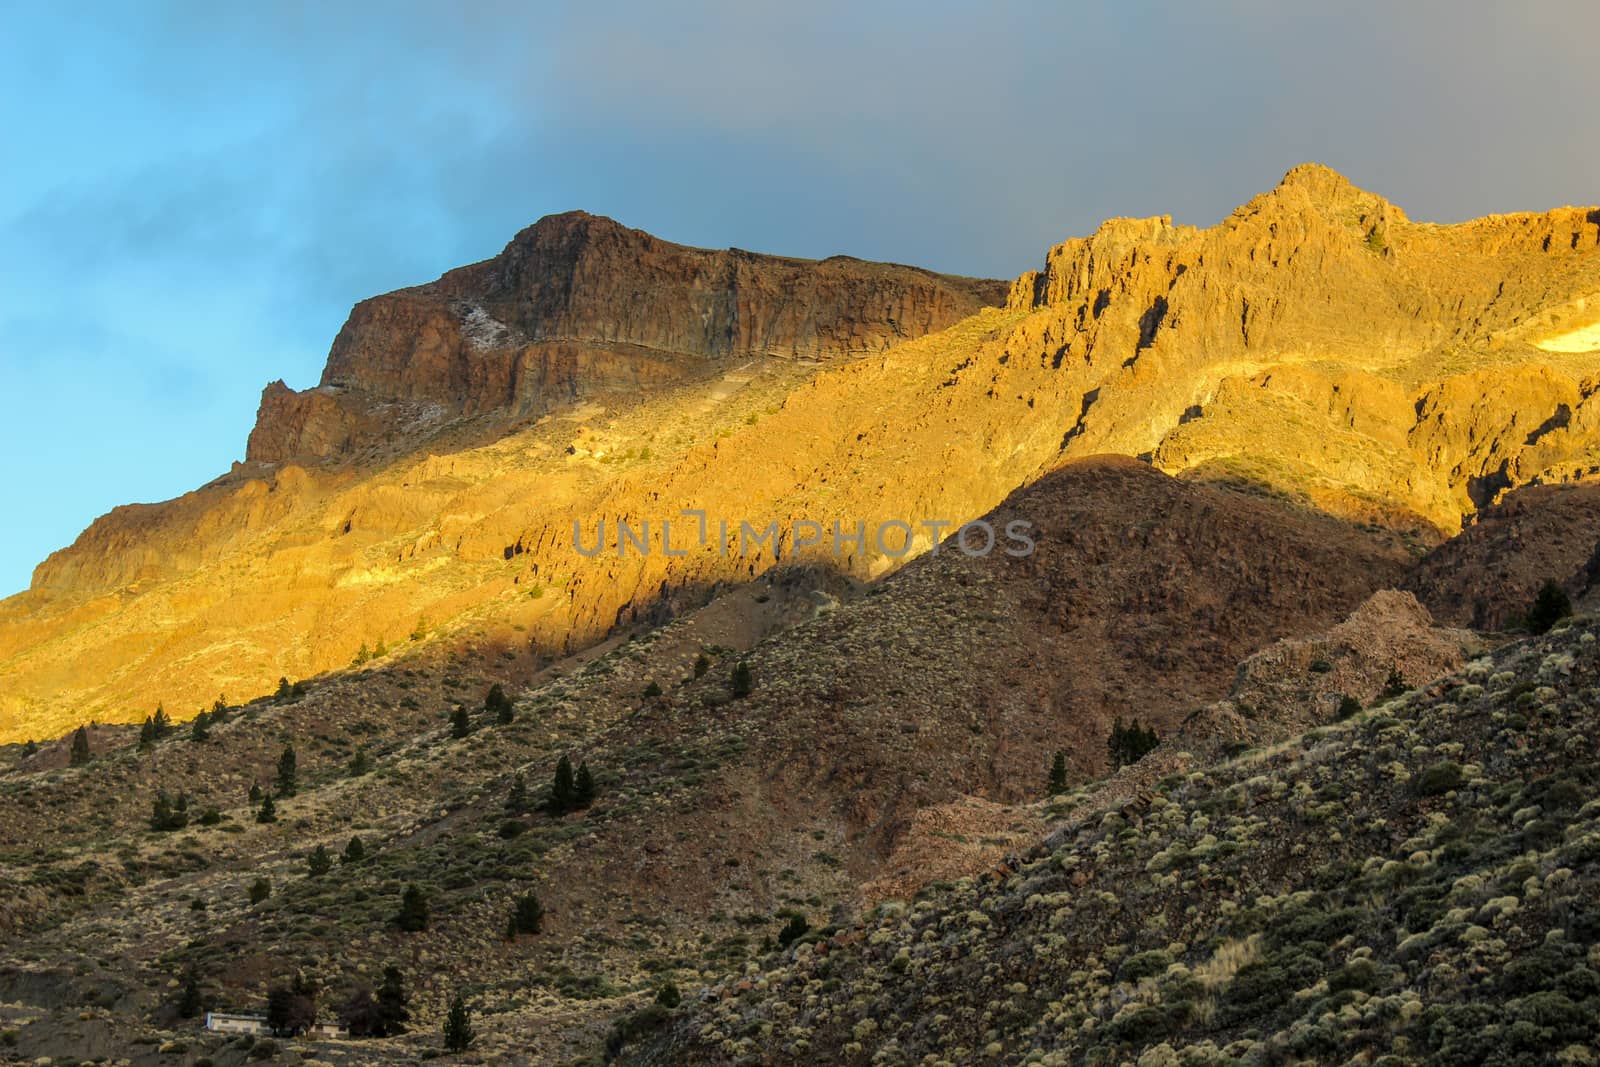 Landscape around the Teide - the highest mountain of spain